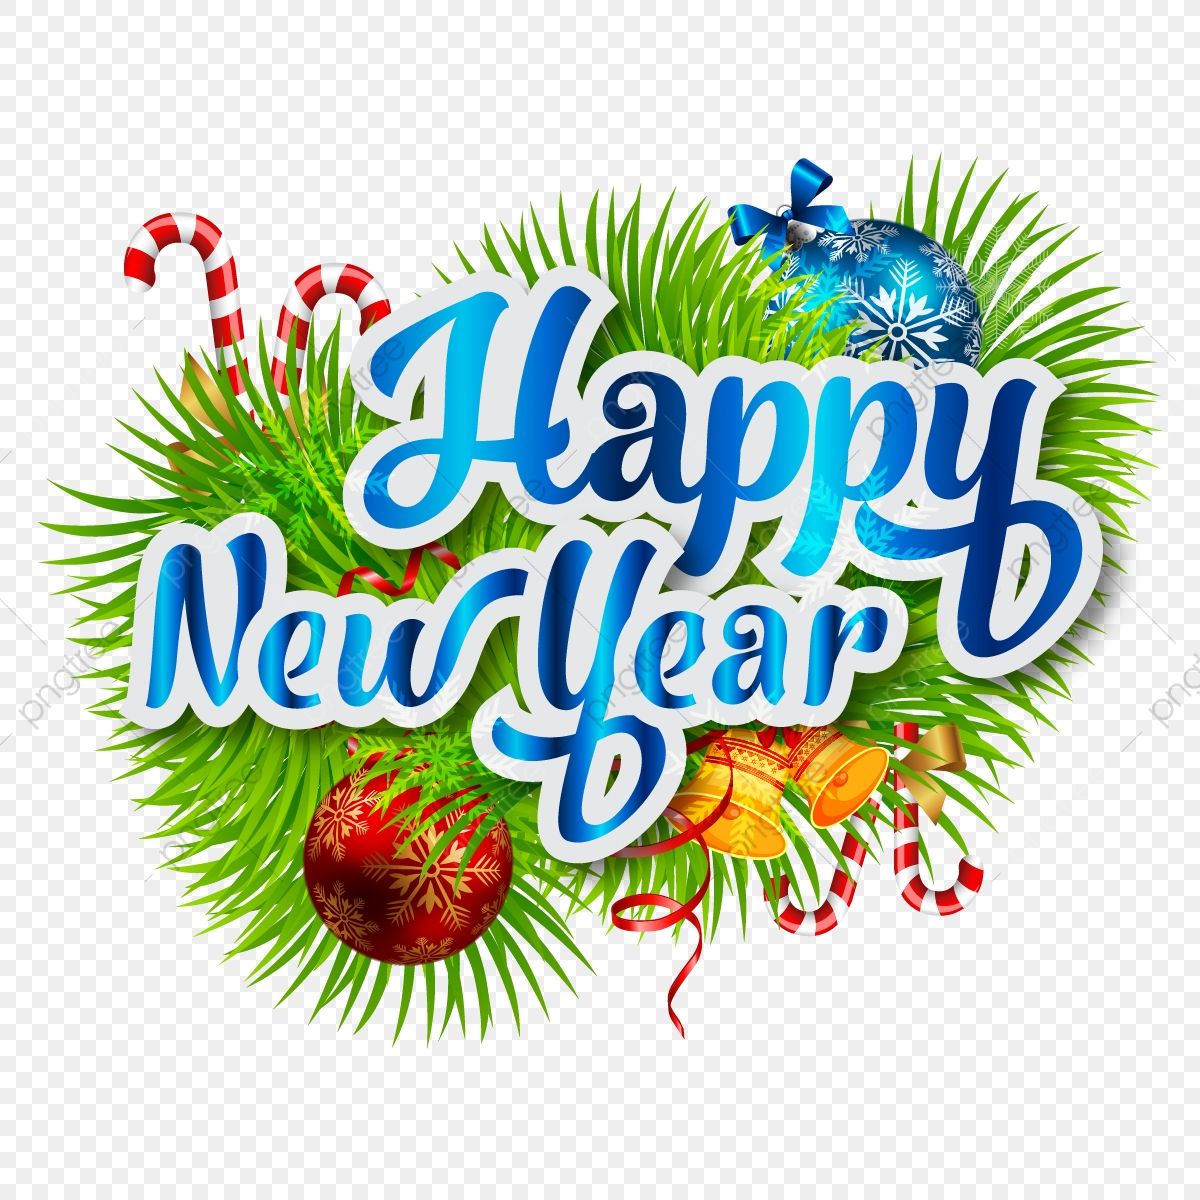 Happy New Year Christmas With Elements Decoration, Happy, New, Year PNG and Vector with Transparent Background for Free Download